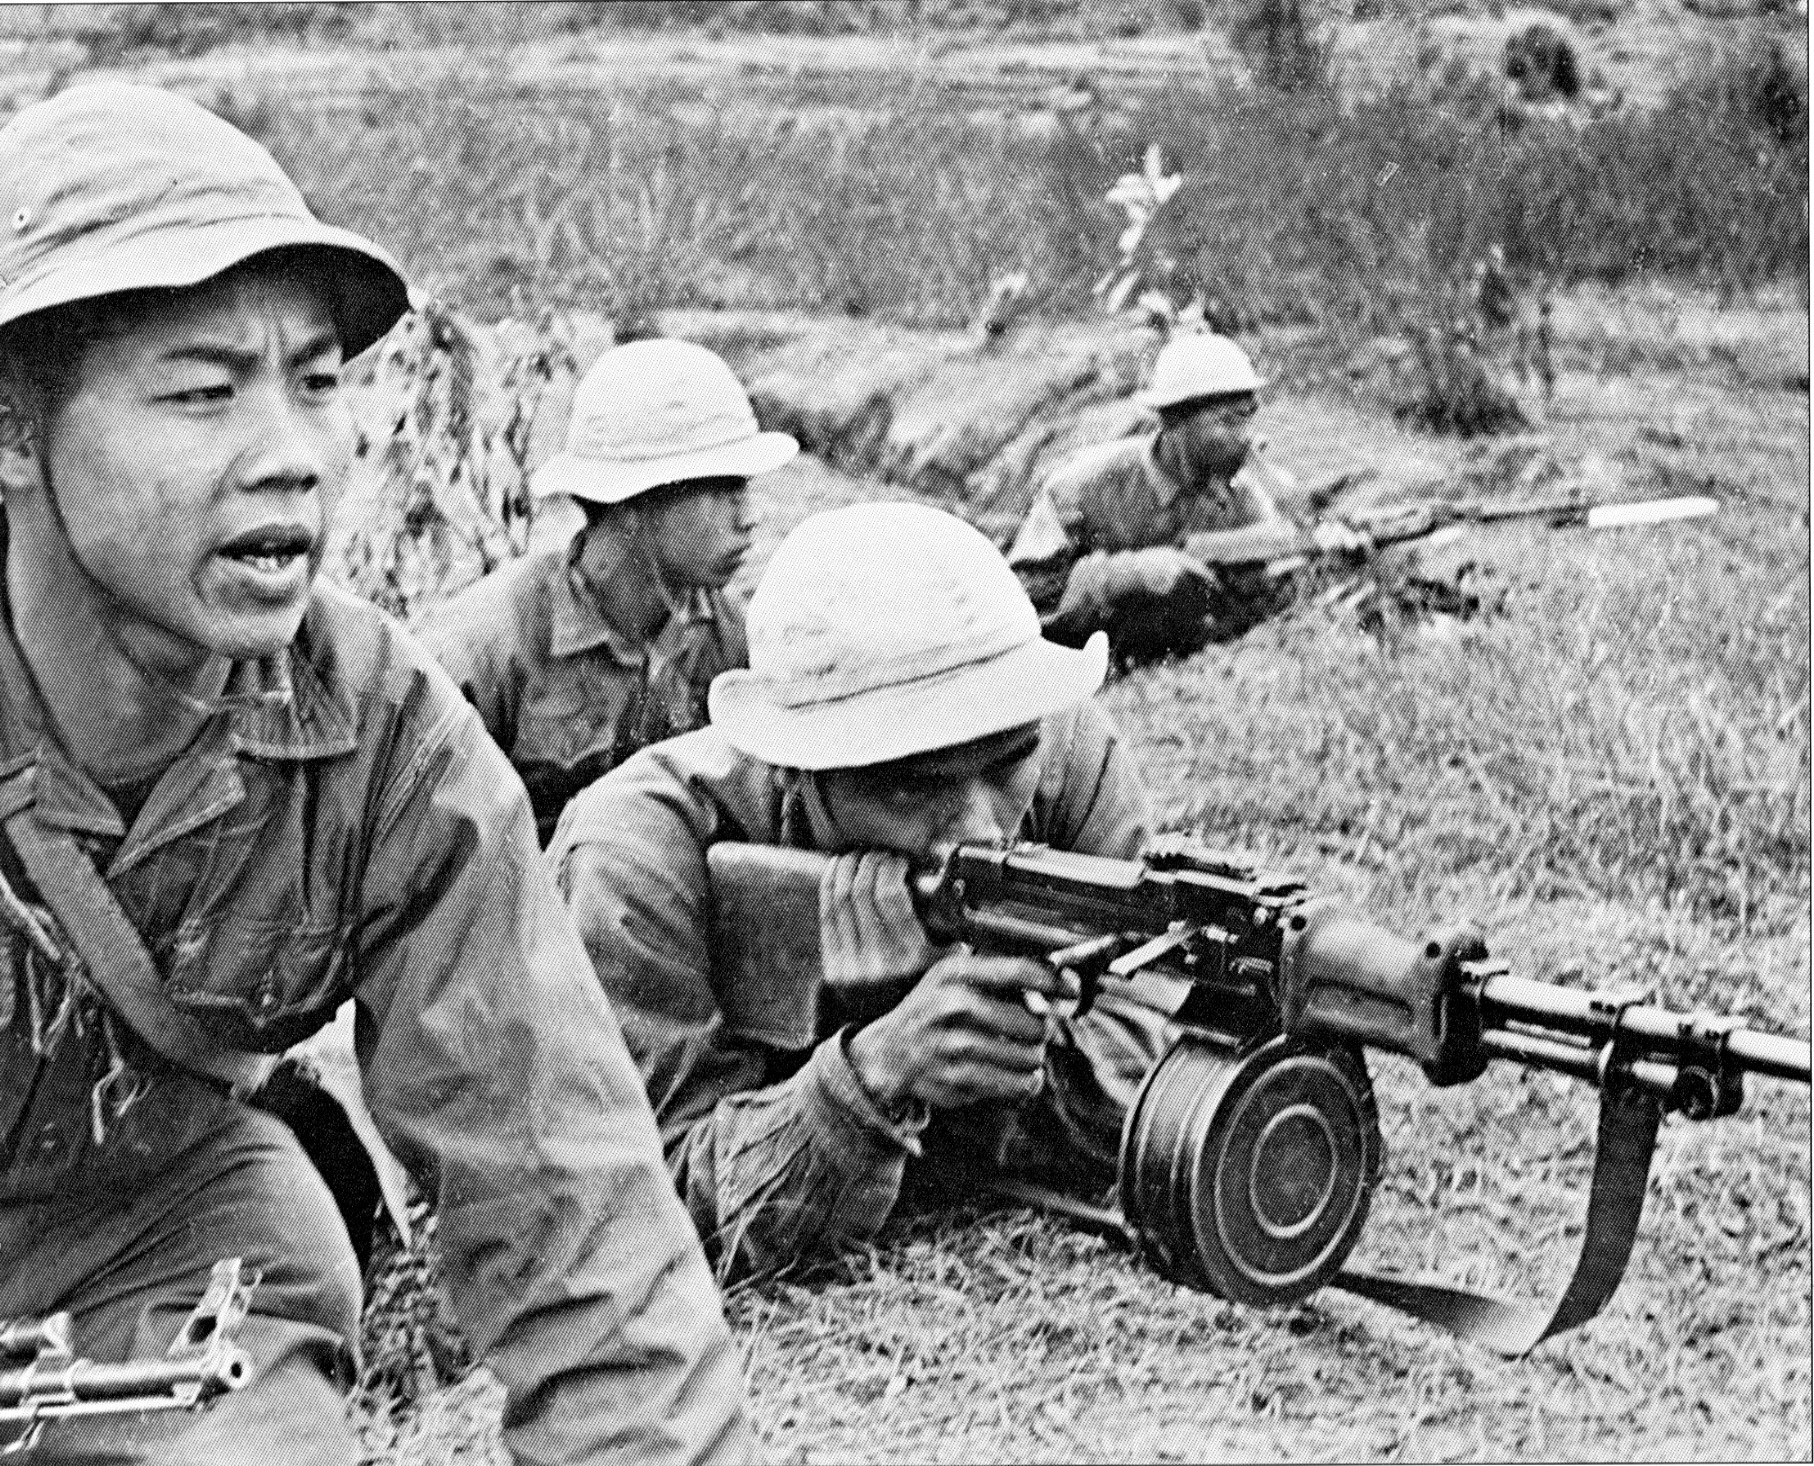 Entrenched NVA soldiers take aim on American positions near the DMZ. Many NVA lost their lives on the Ho Chi Minh trail south before ever setting foot in South Vietnam.